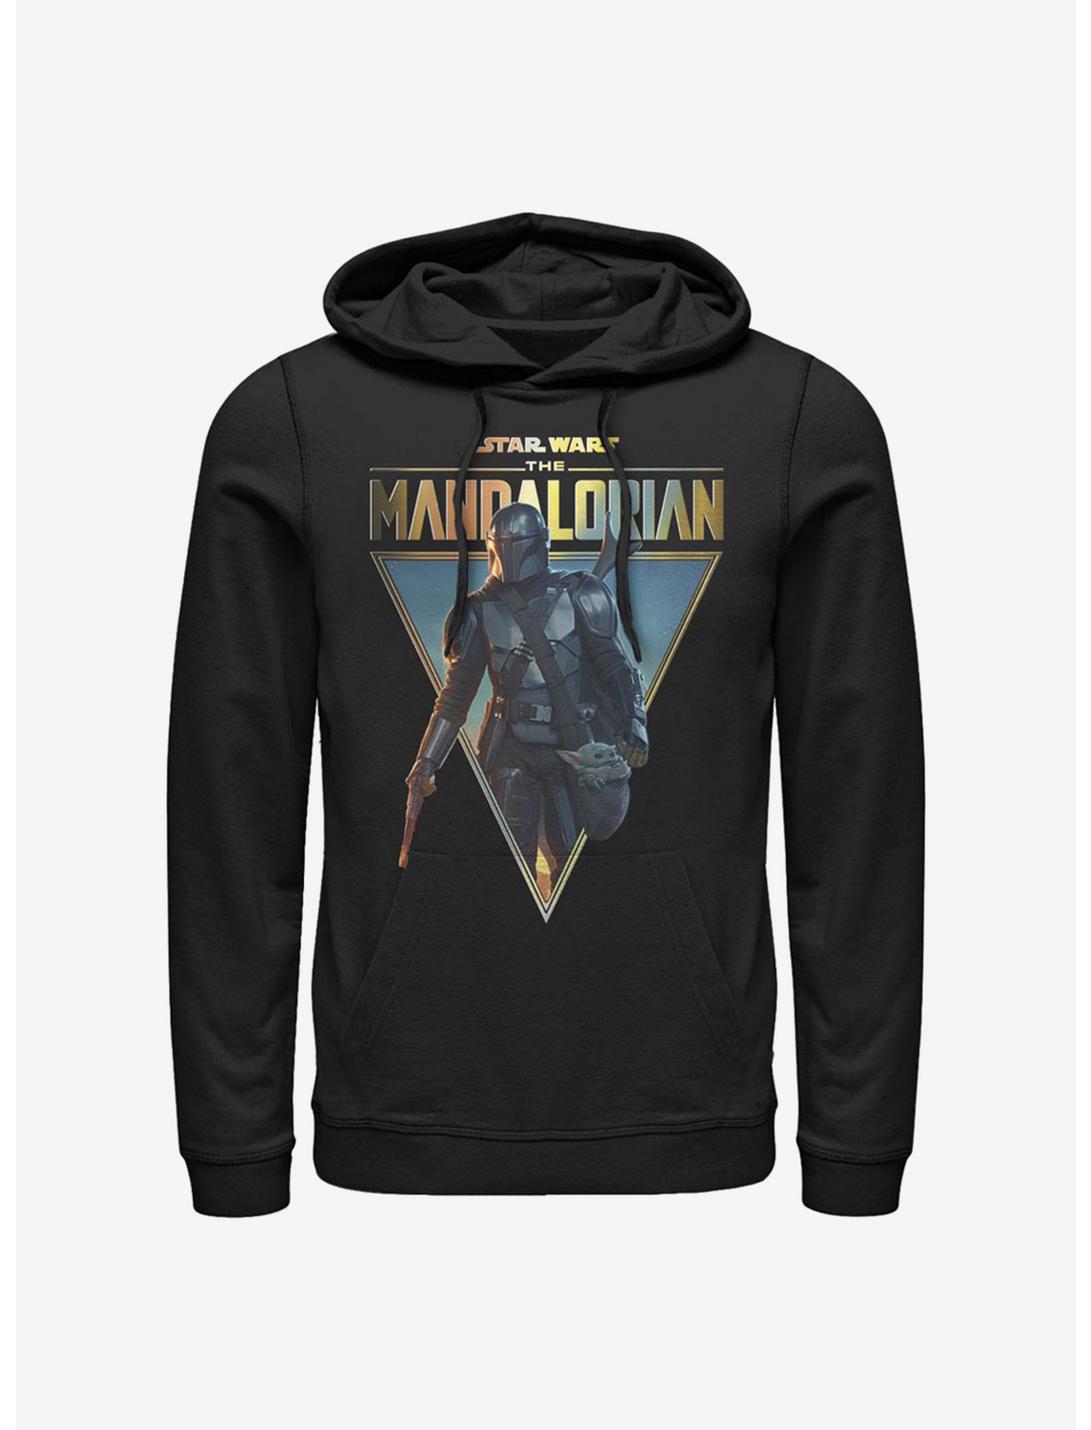 Star Wars The Mandalorian Mando And The Child Poster Hoodie, BLACK, hi-res